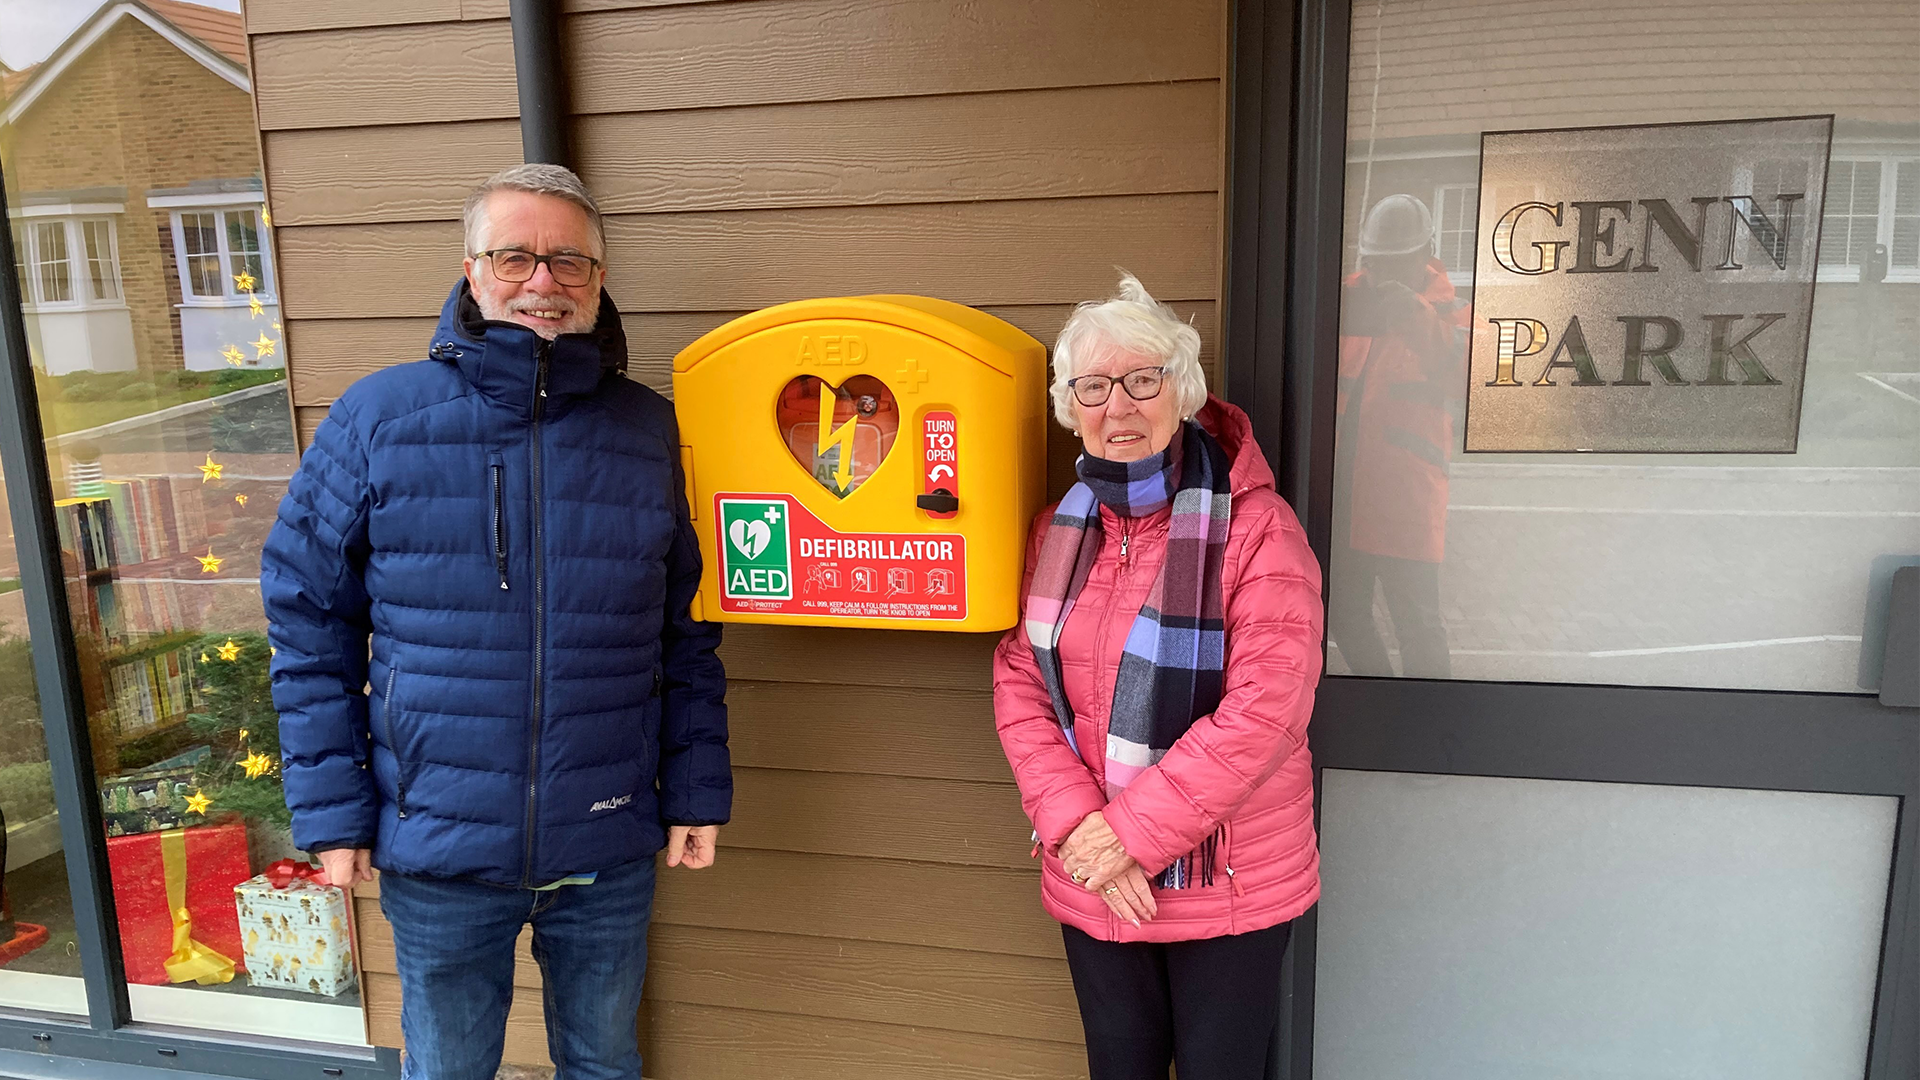 two cobnut park residents stand next to a bright yellow box housing a defibrillator